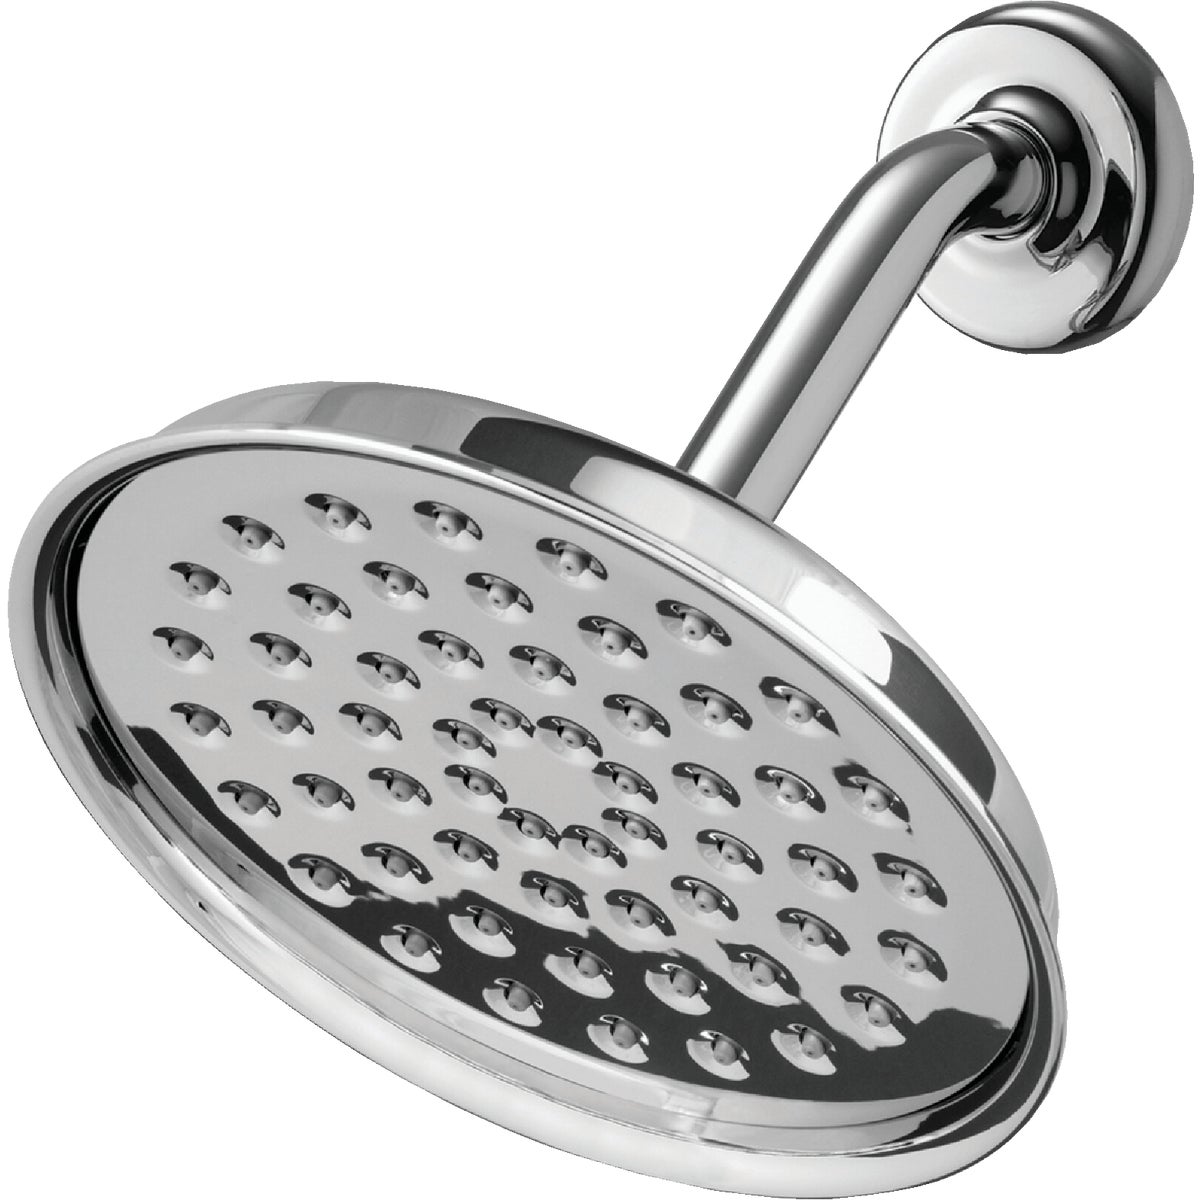 Item 403531, Step into your own private spa with this Waterpik RainFall+ rain shower 